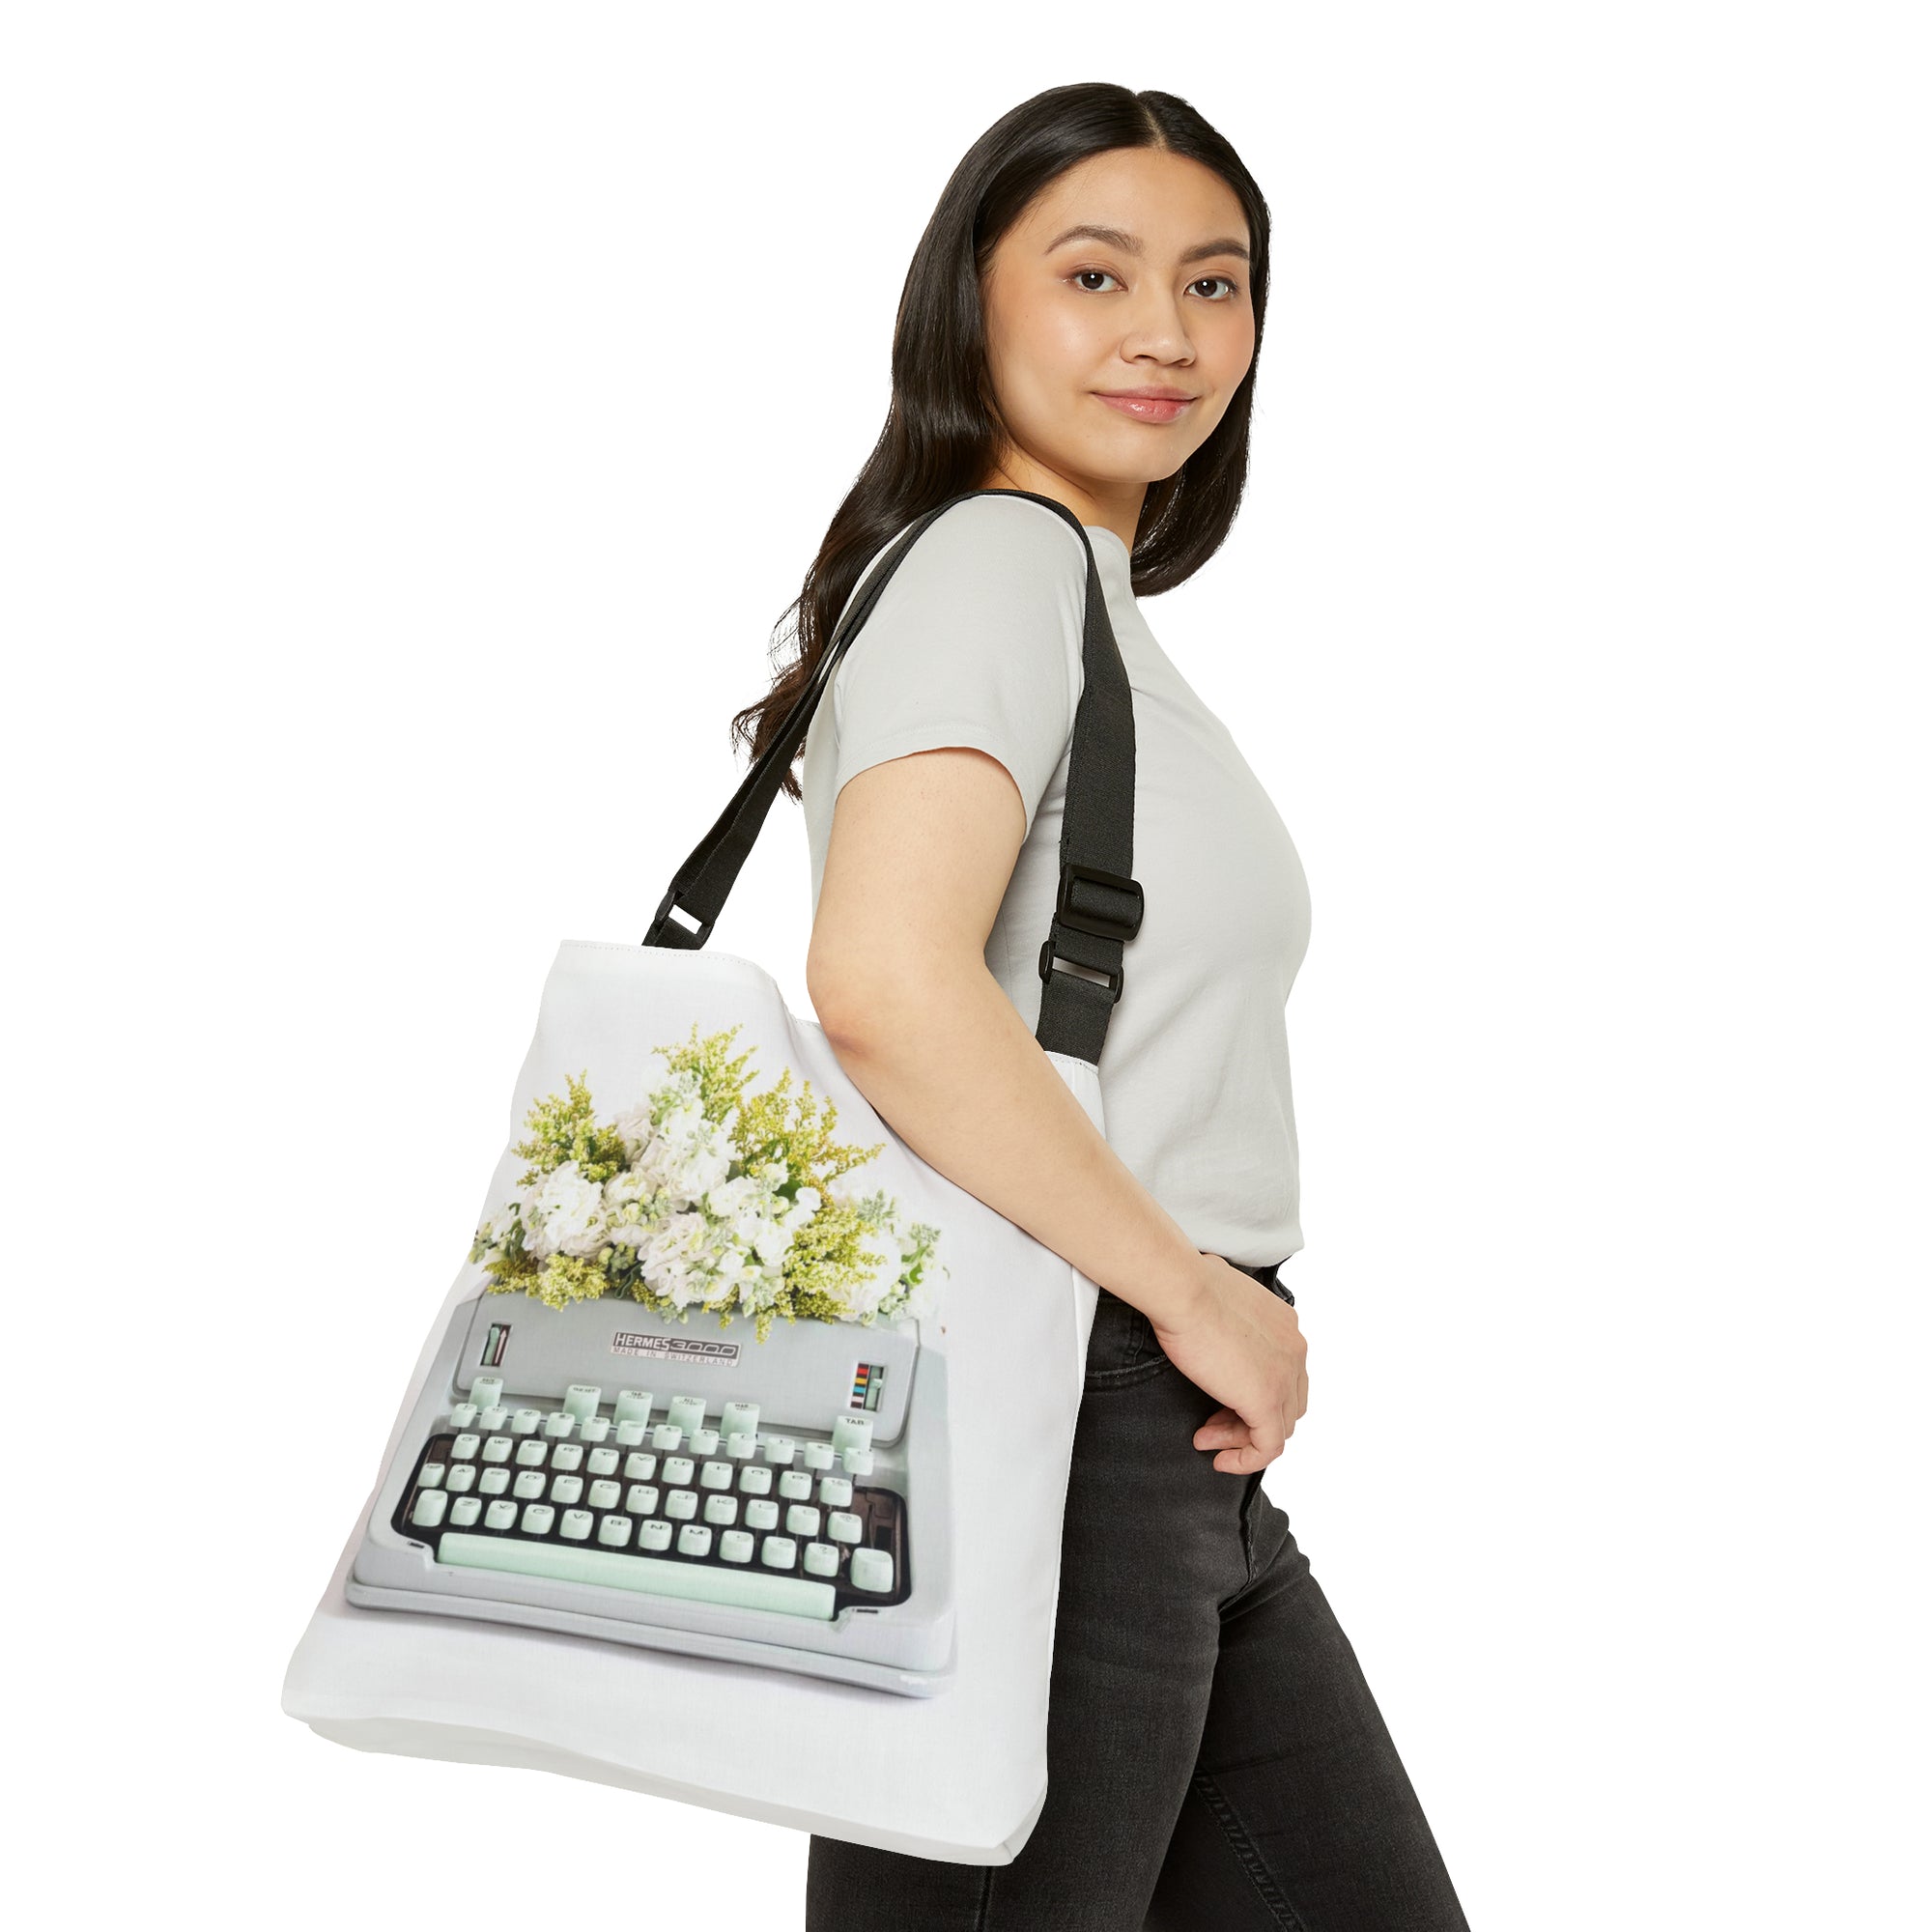 "Read. Write. Live. with Typewriter" Adjustable Tote